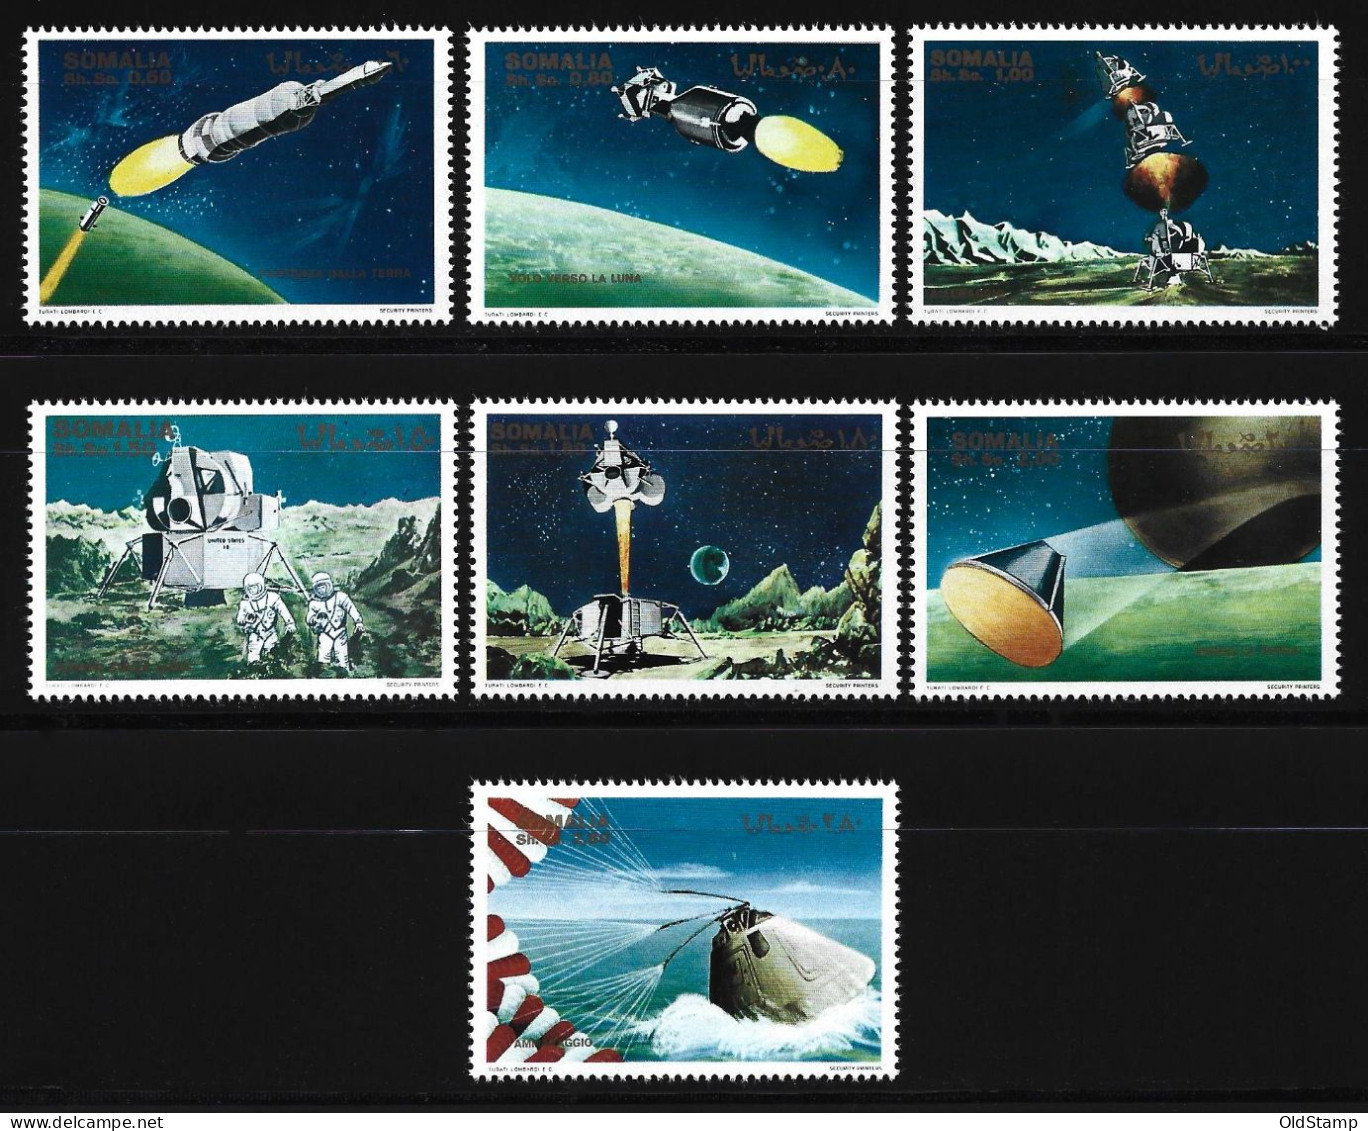 Somalia SPACE SPACESHIP PLANET ASTRONAUT STAR MNH LUXE Africa Stamps FULL SET - Collezioni